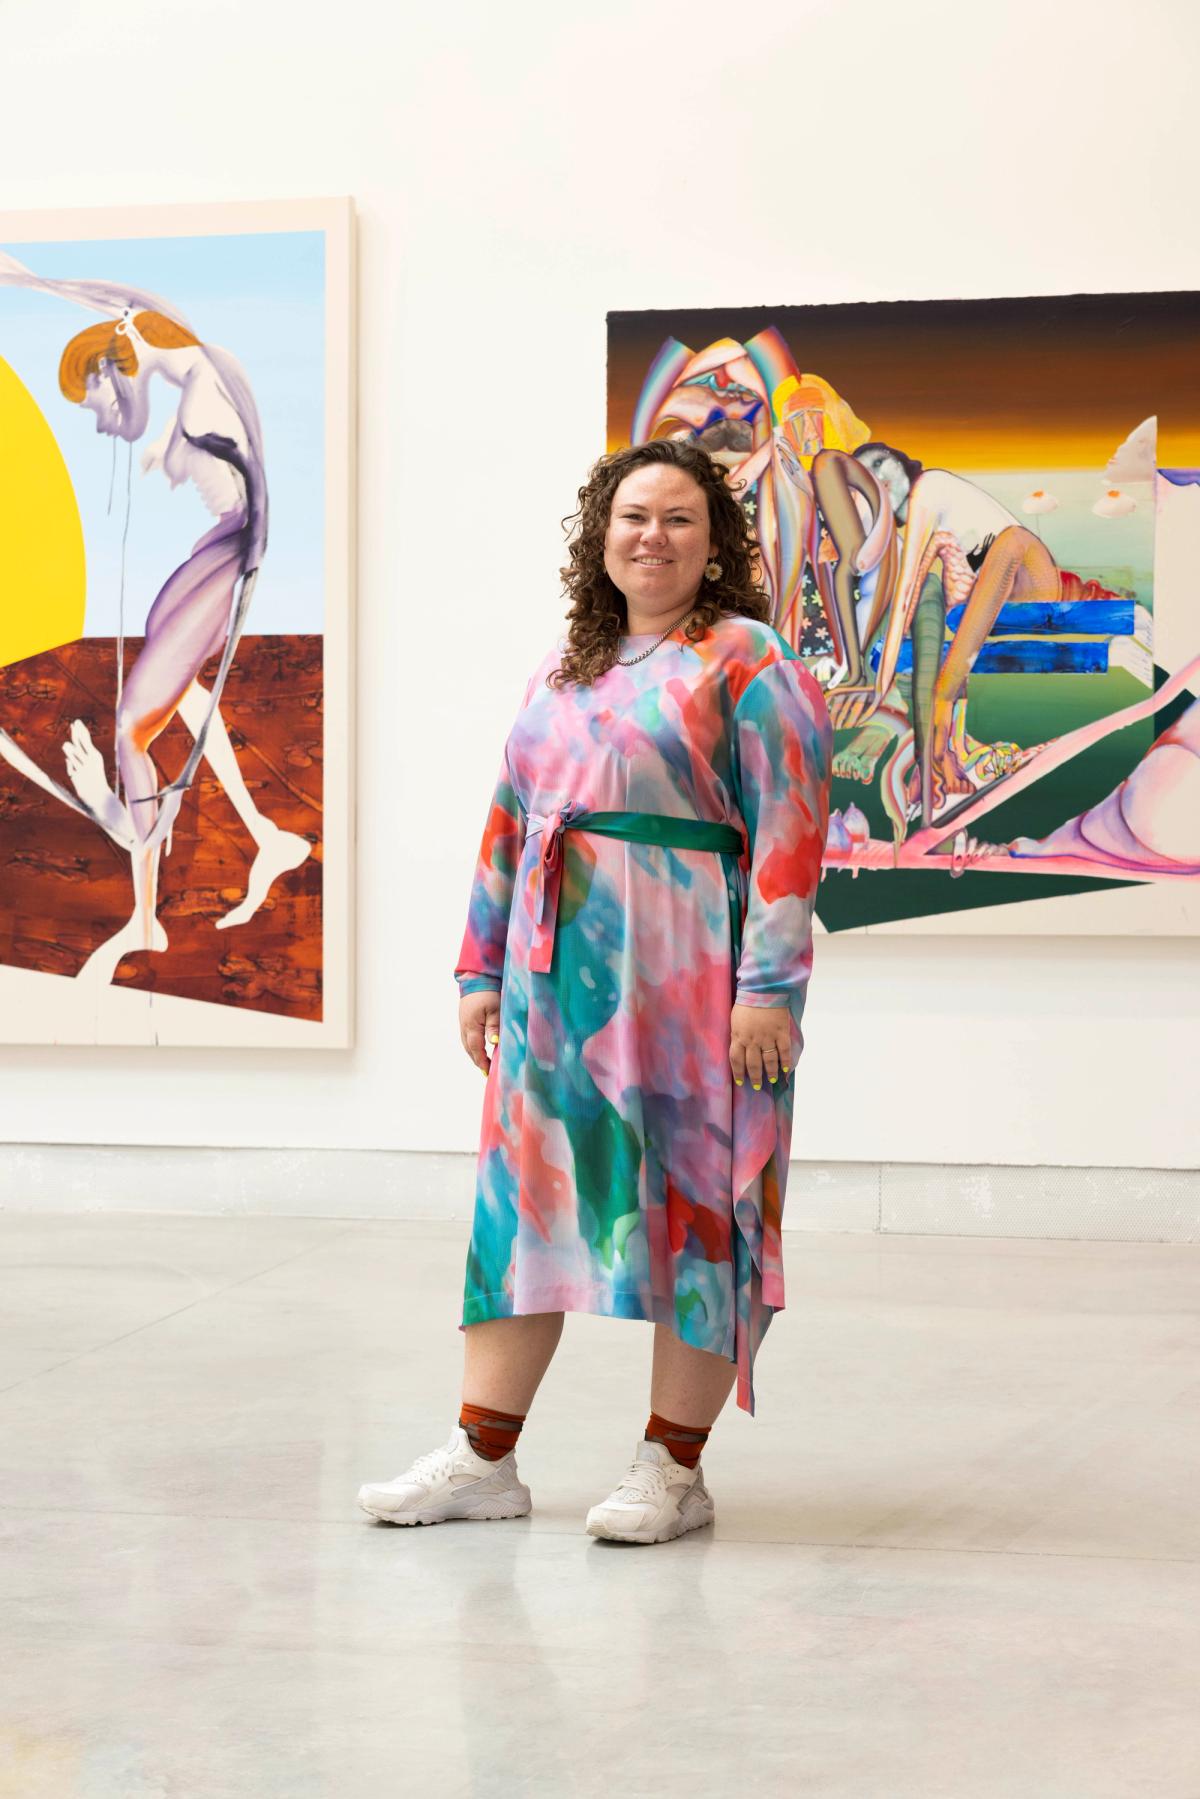 Christina Quarles talks to Ben Luke about her greatest creative influences Photo: Andrea Rossetti. Courtesy of the artist, Hauser & Wirth, and Pilar Corrias, London